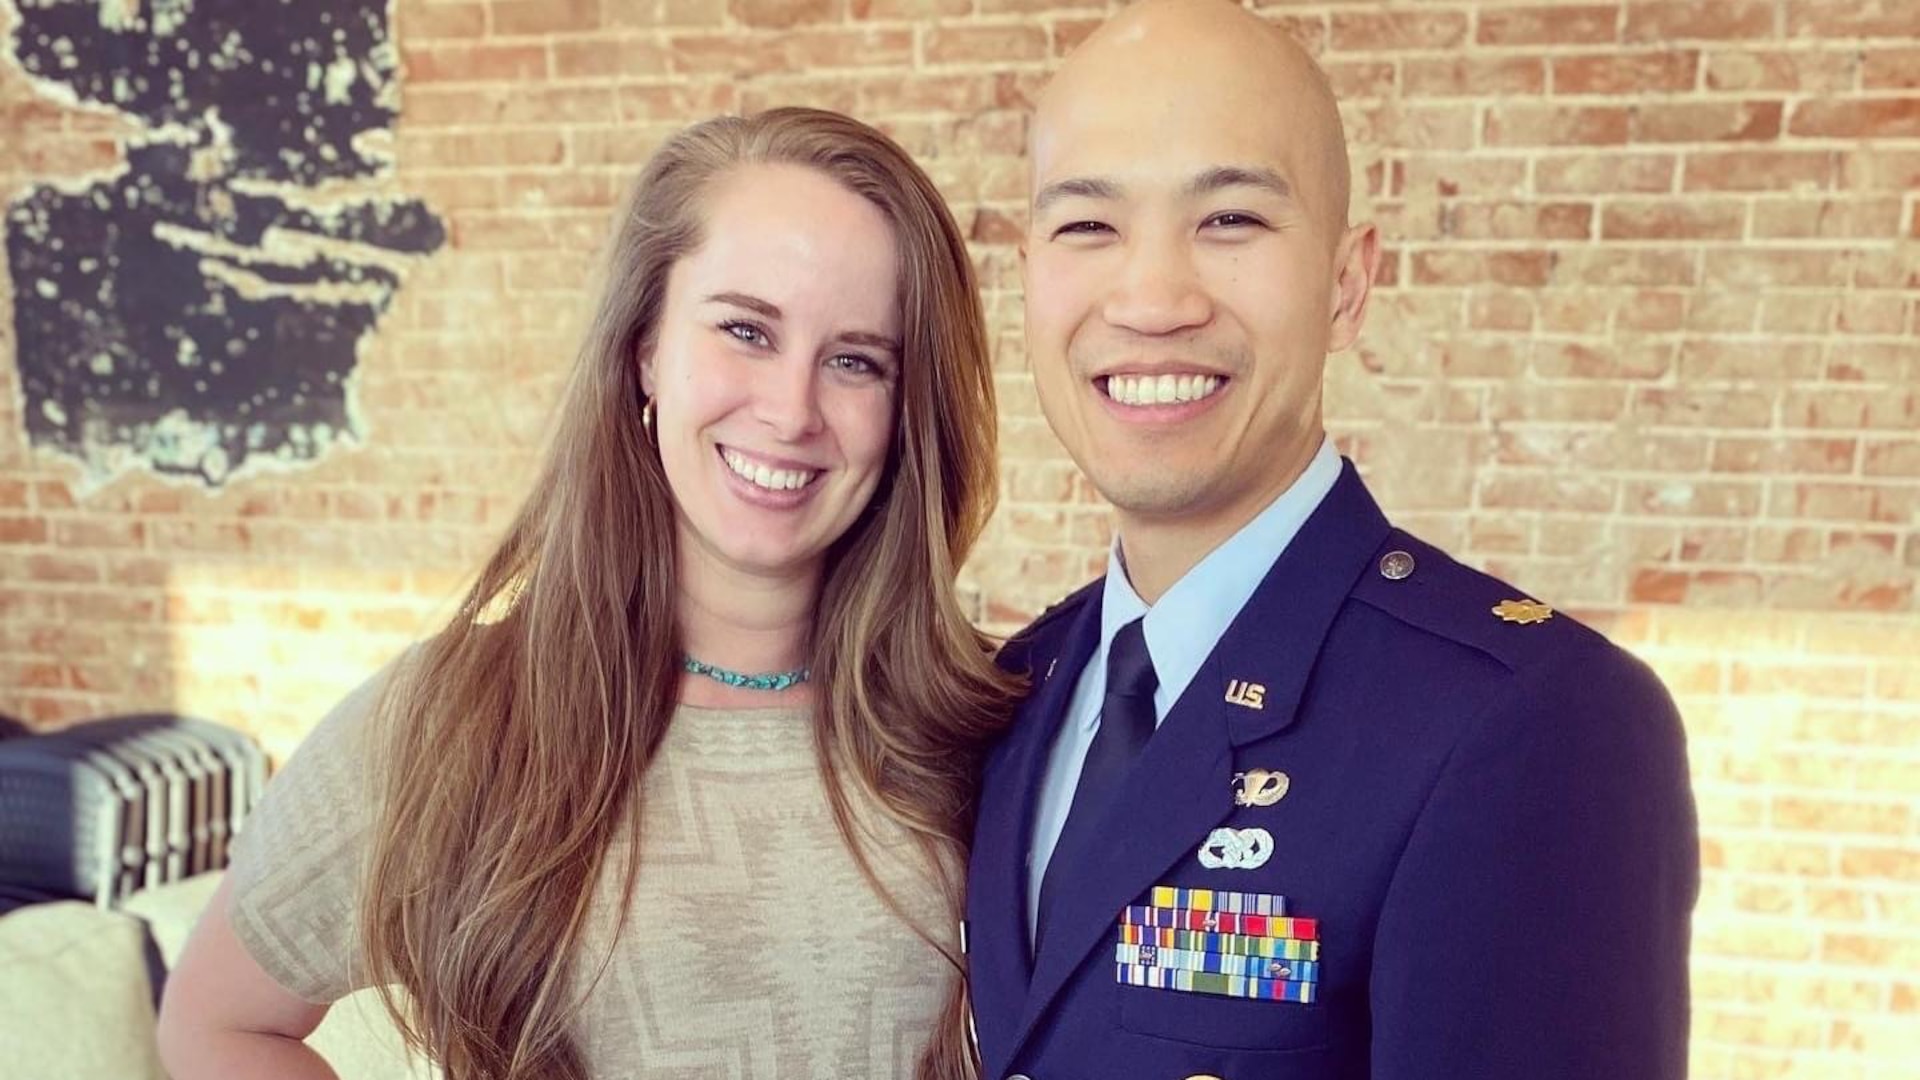 Major Truong and his wife Kate